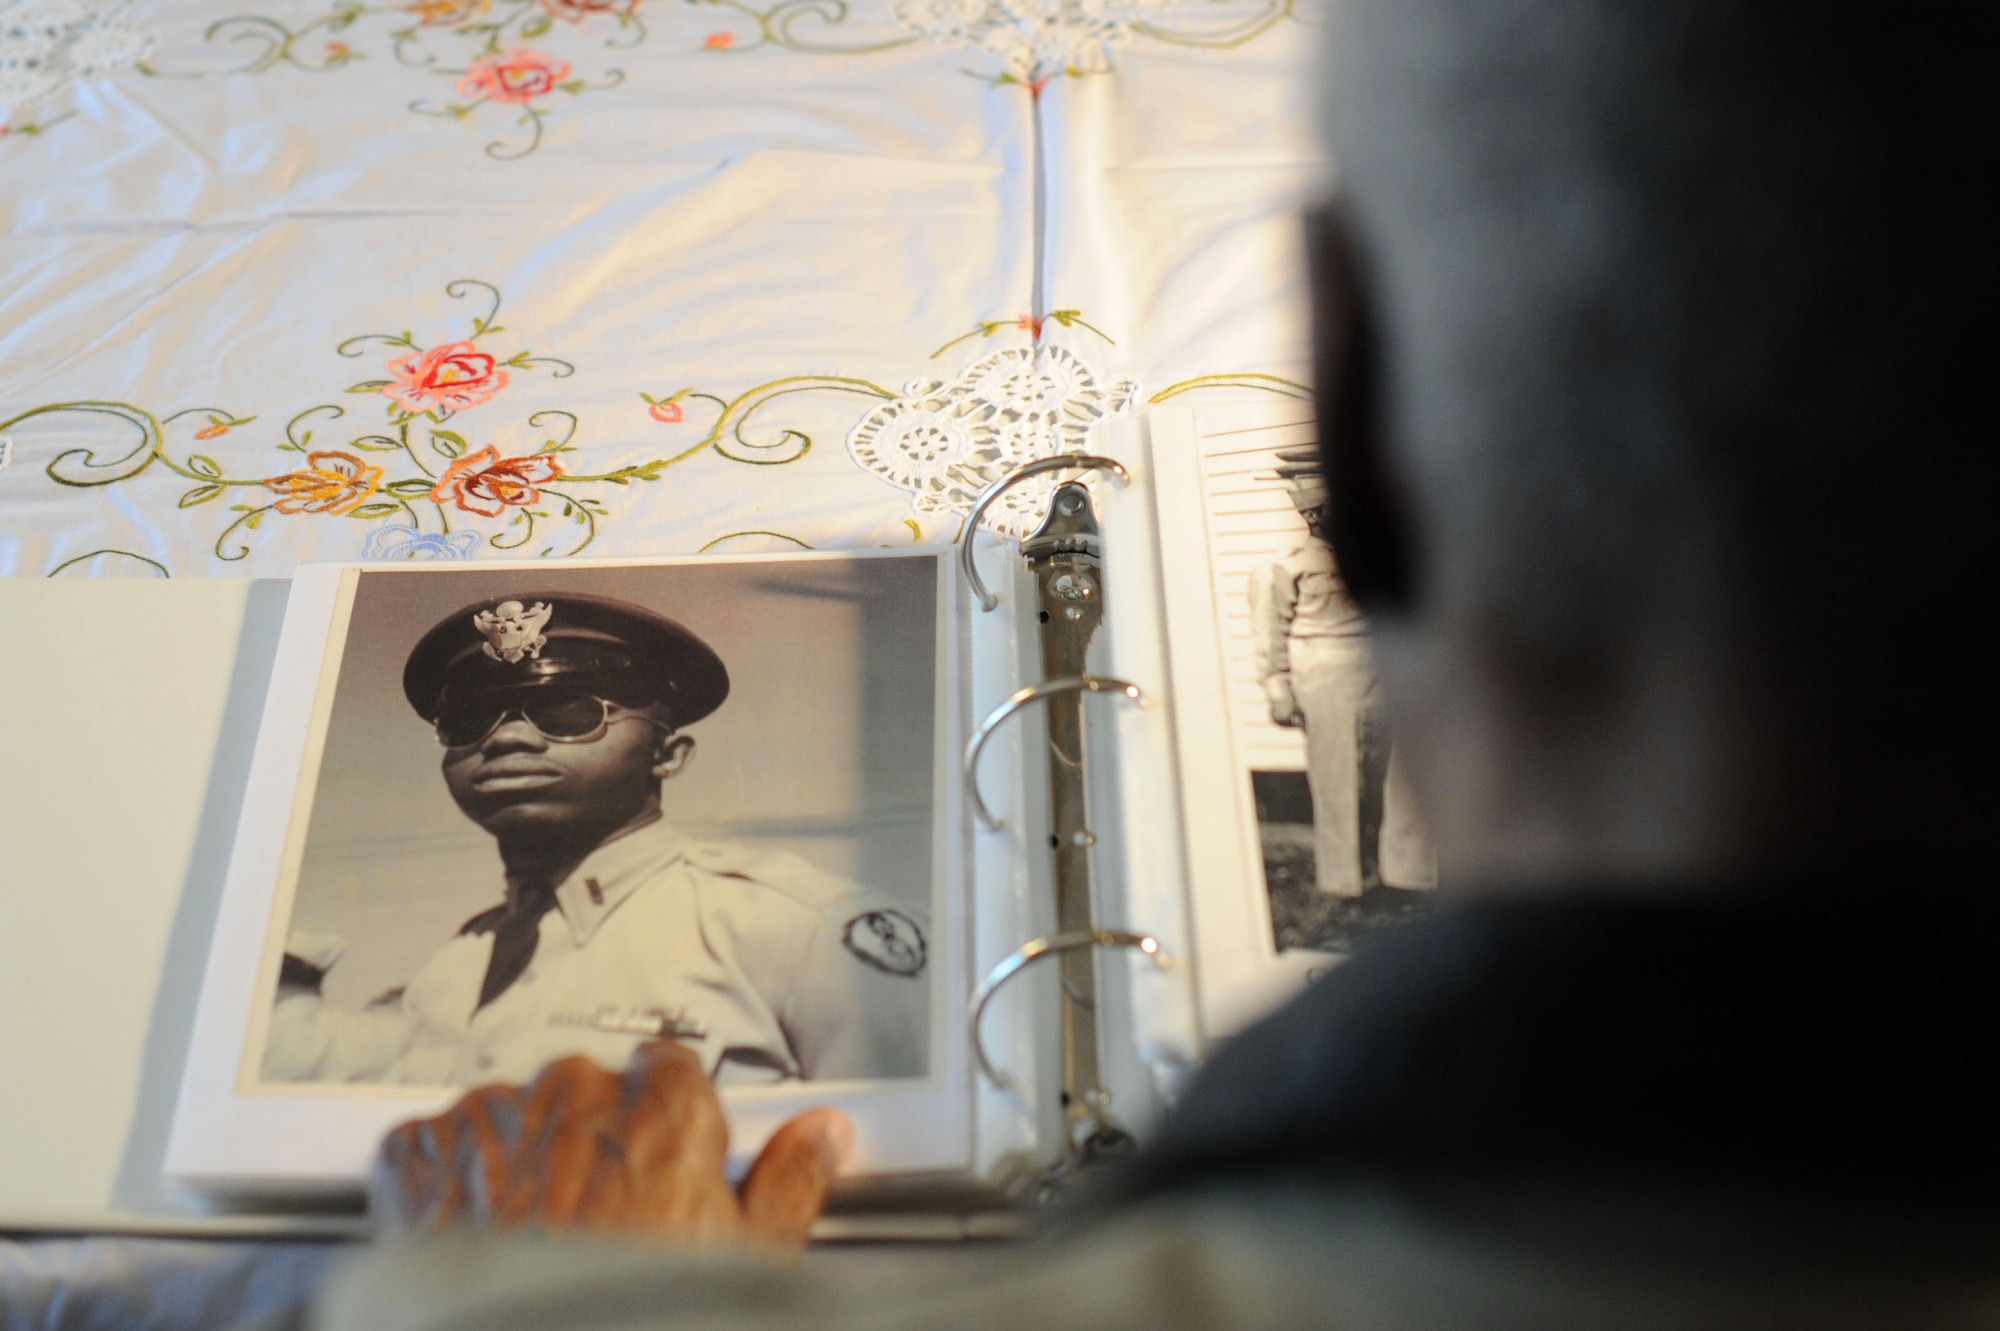 Retired Maj. George Boyd looks at a photo of himself in service dress when he was younger at his home in Wichita, Kan., Feb. 25, 2016. Boyd served for nearly three decades as an enlisted Airman and a commissioned officer and is currently a colonel in the U.S. Civil Air Patrol. (U.S. Air Force photo/Airman 1st Class Christopher Thornbury) 